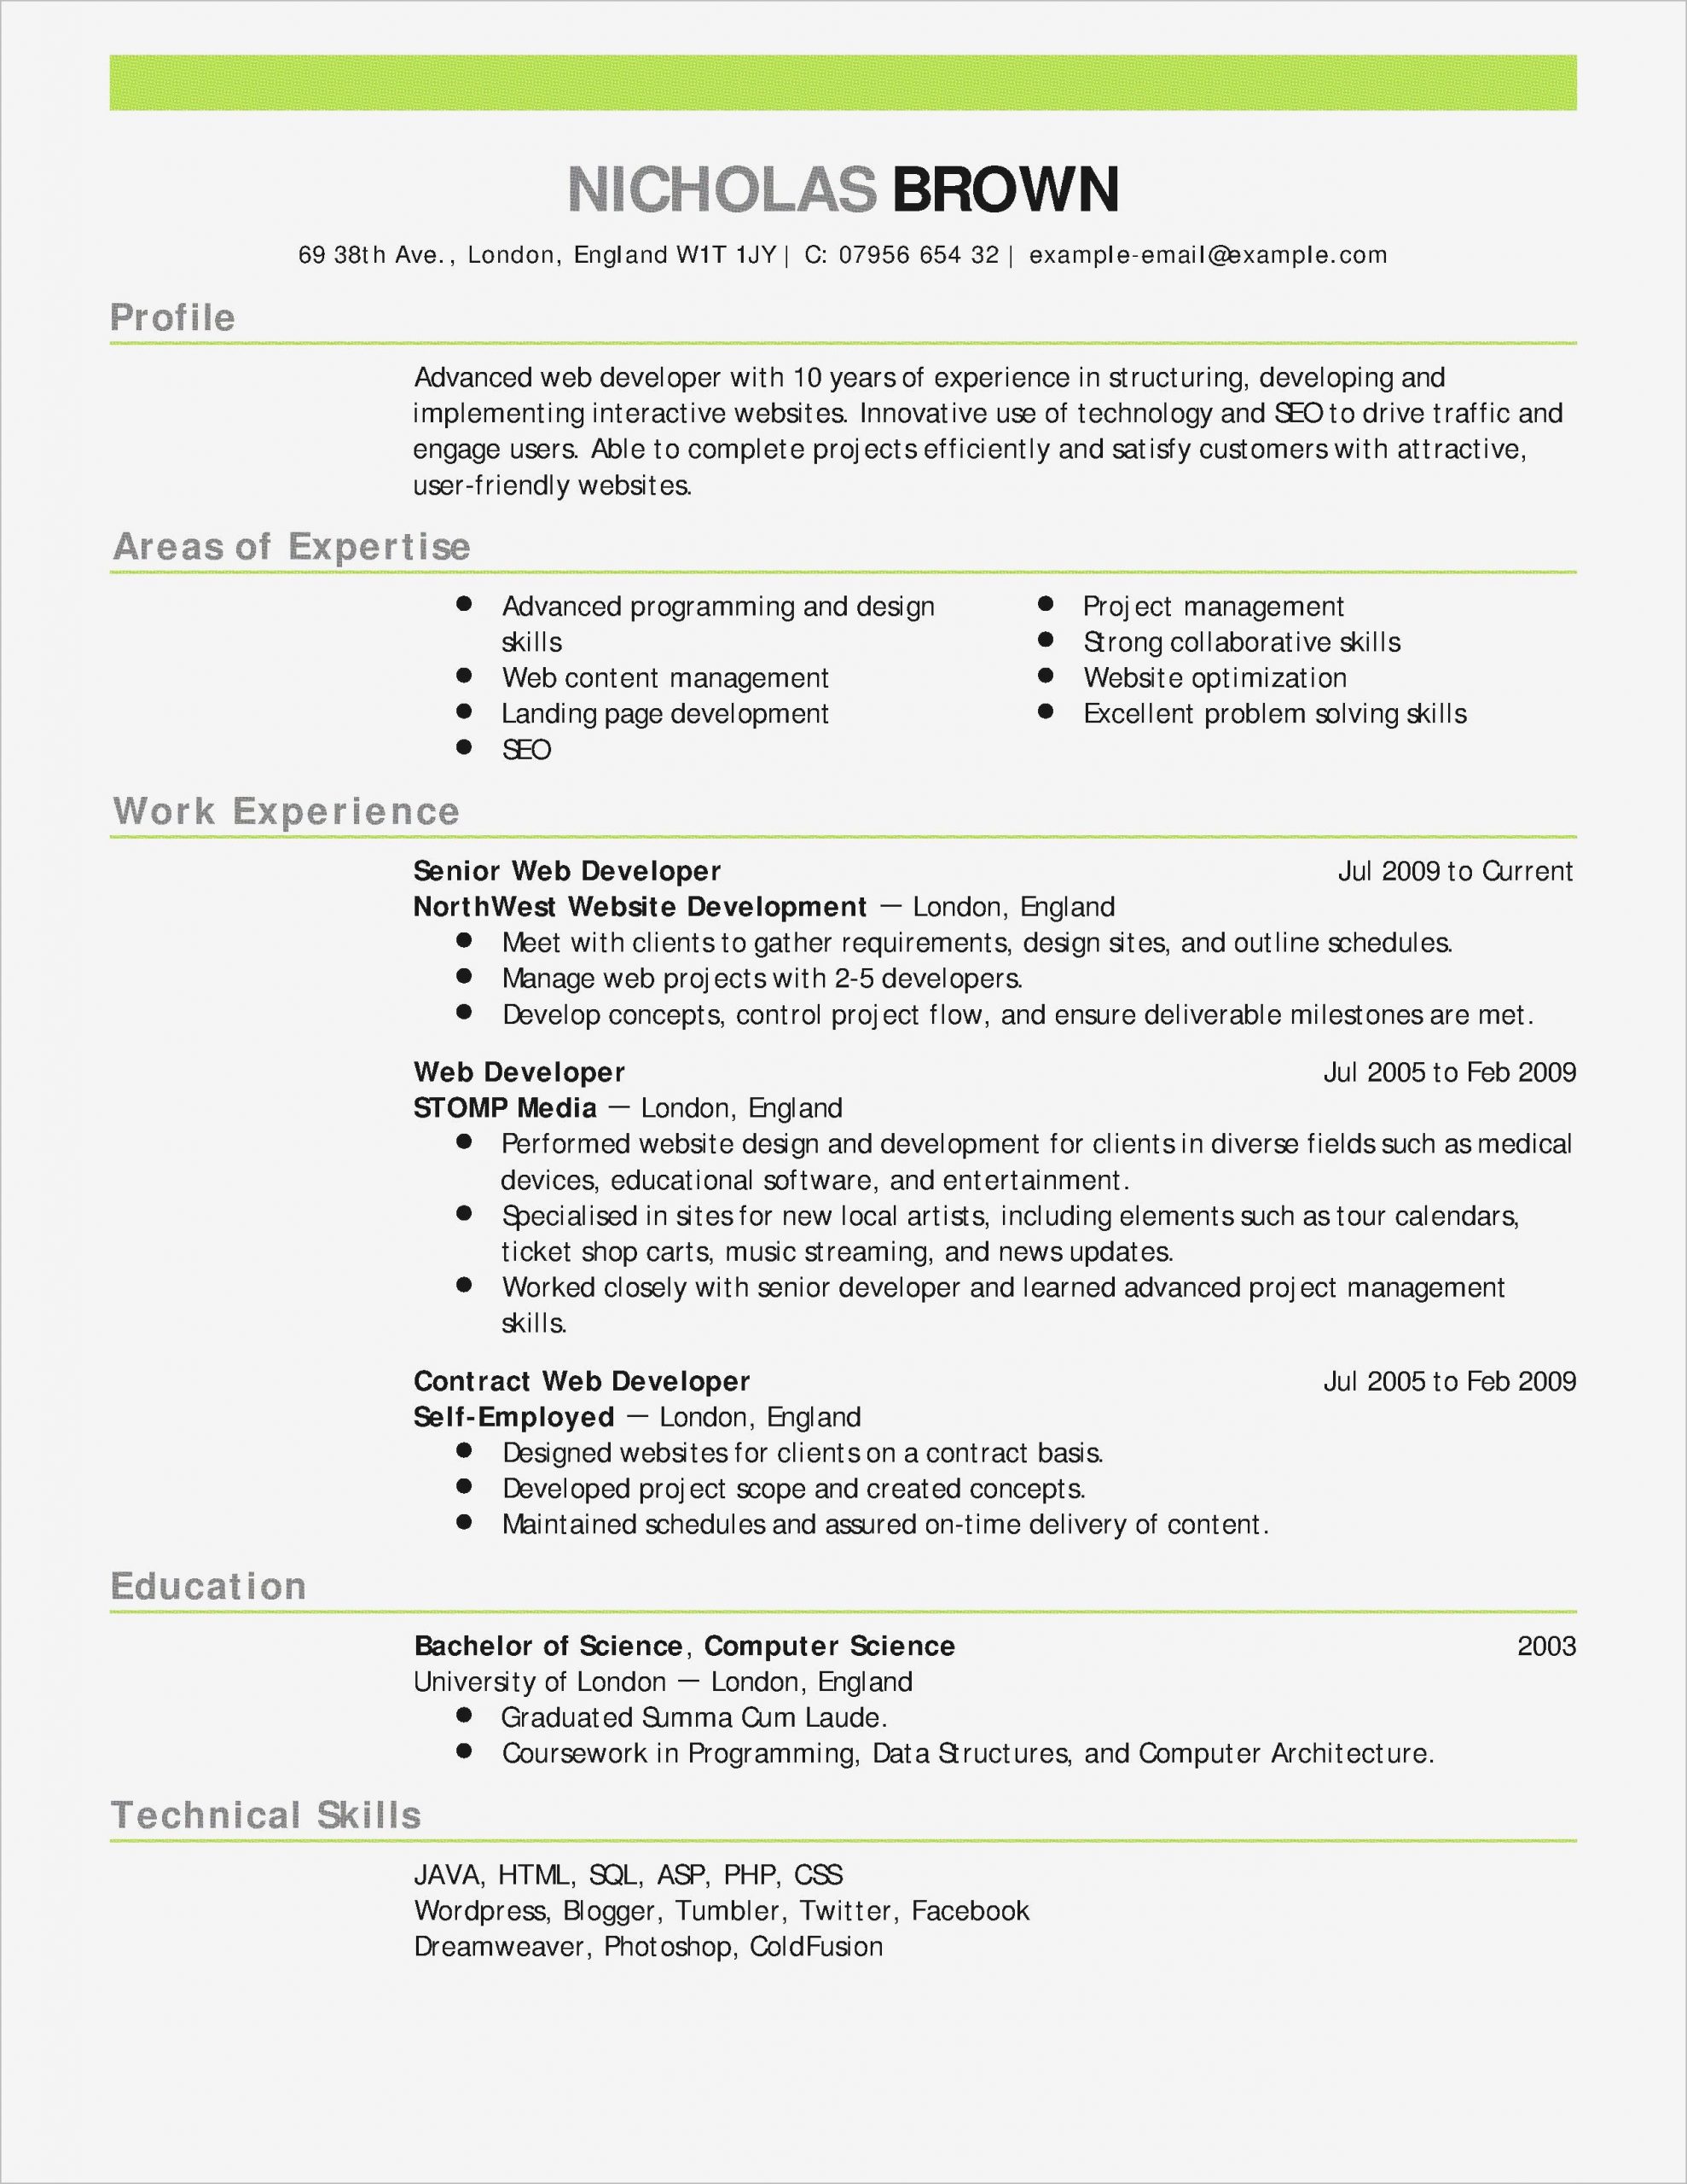 Sample Resume for Computer Science Faculty Professor Resume Template Louiesportsmouth.com Job Resume …